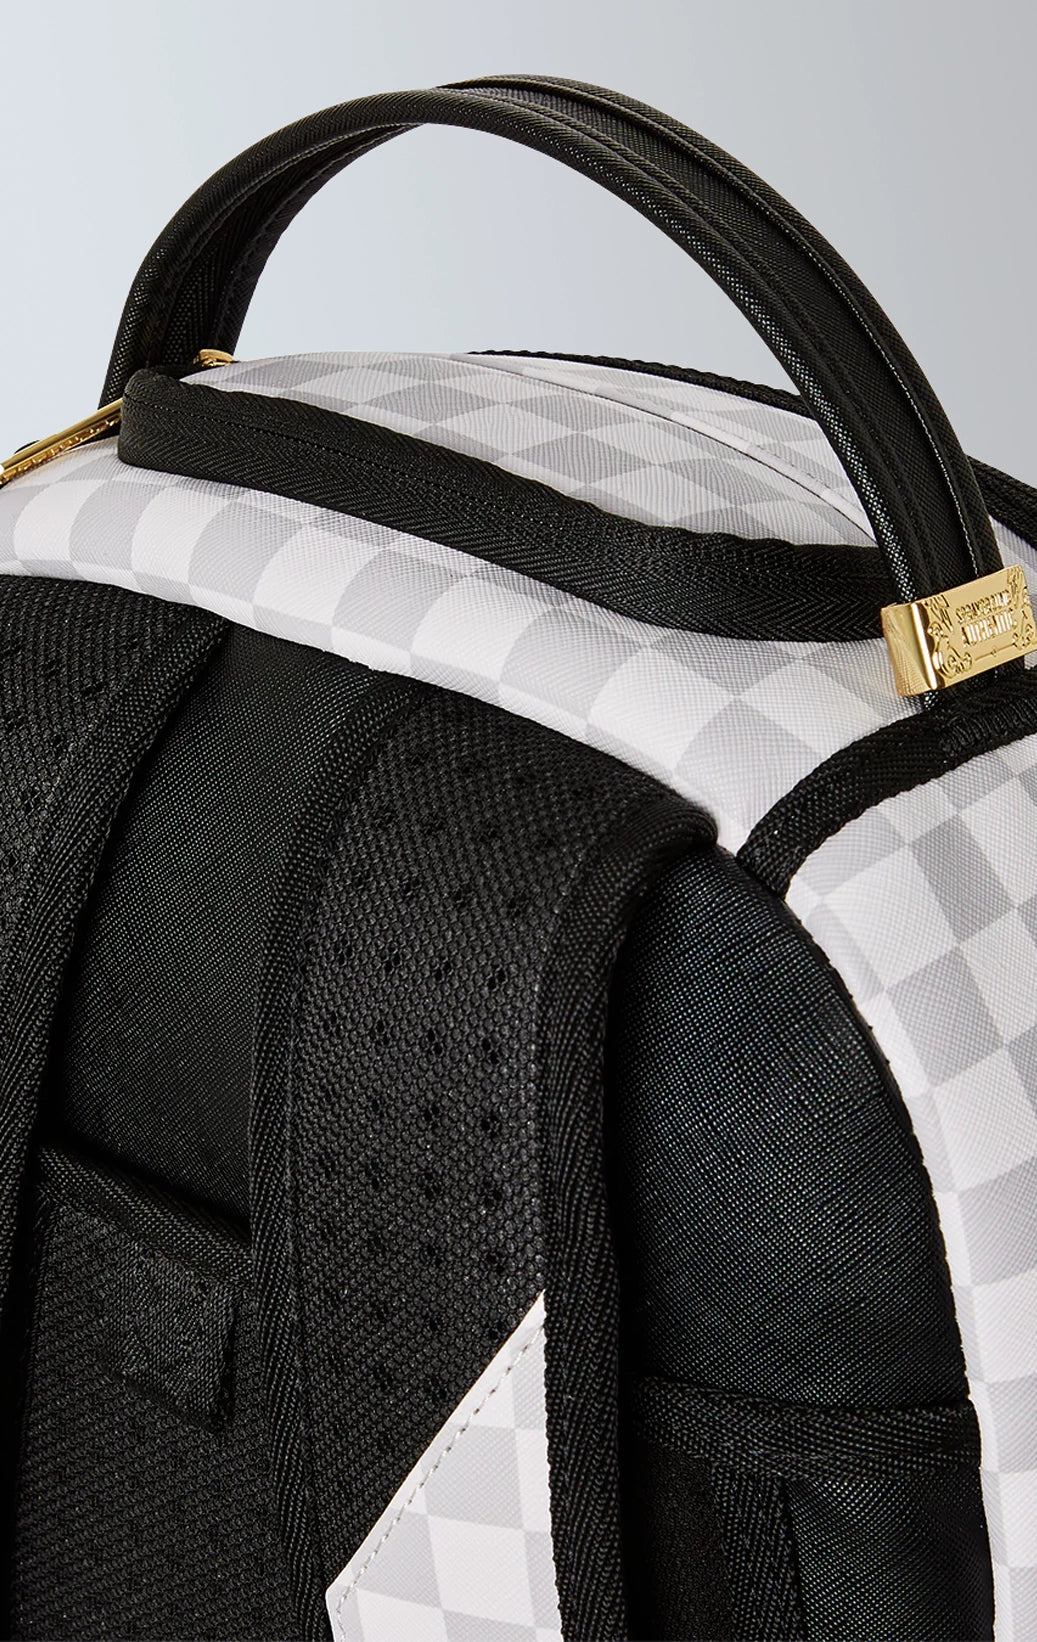 Sprayground Astromane backpack, grey with checkered pattern and laser-cut details. Limited edition.